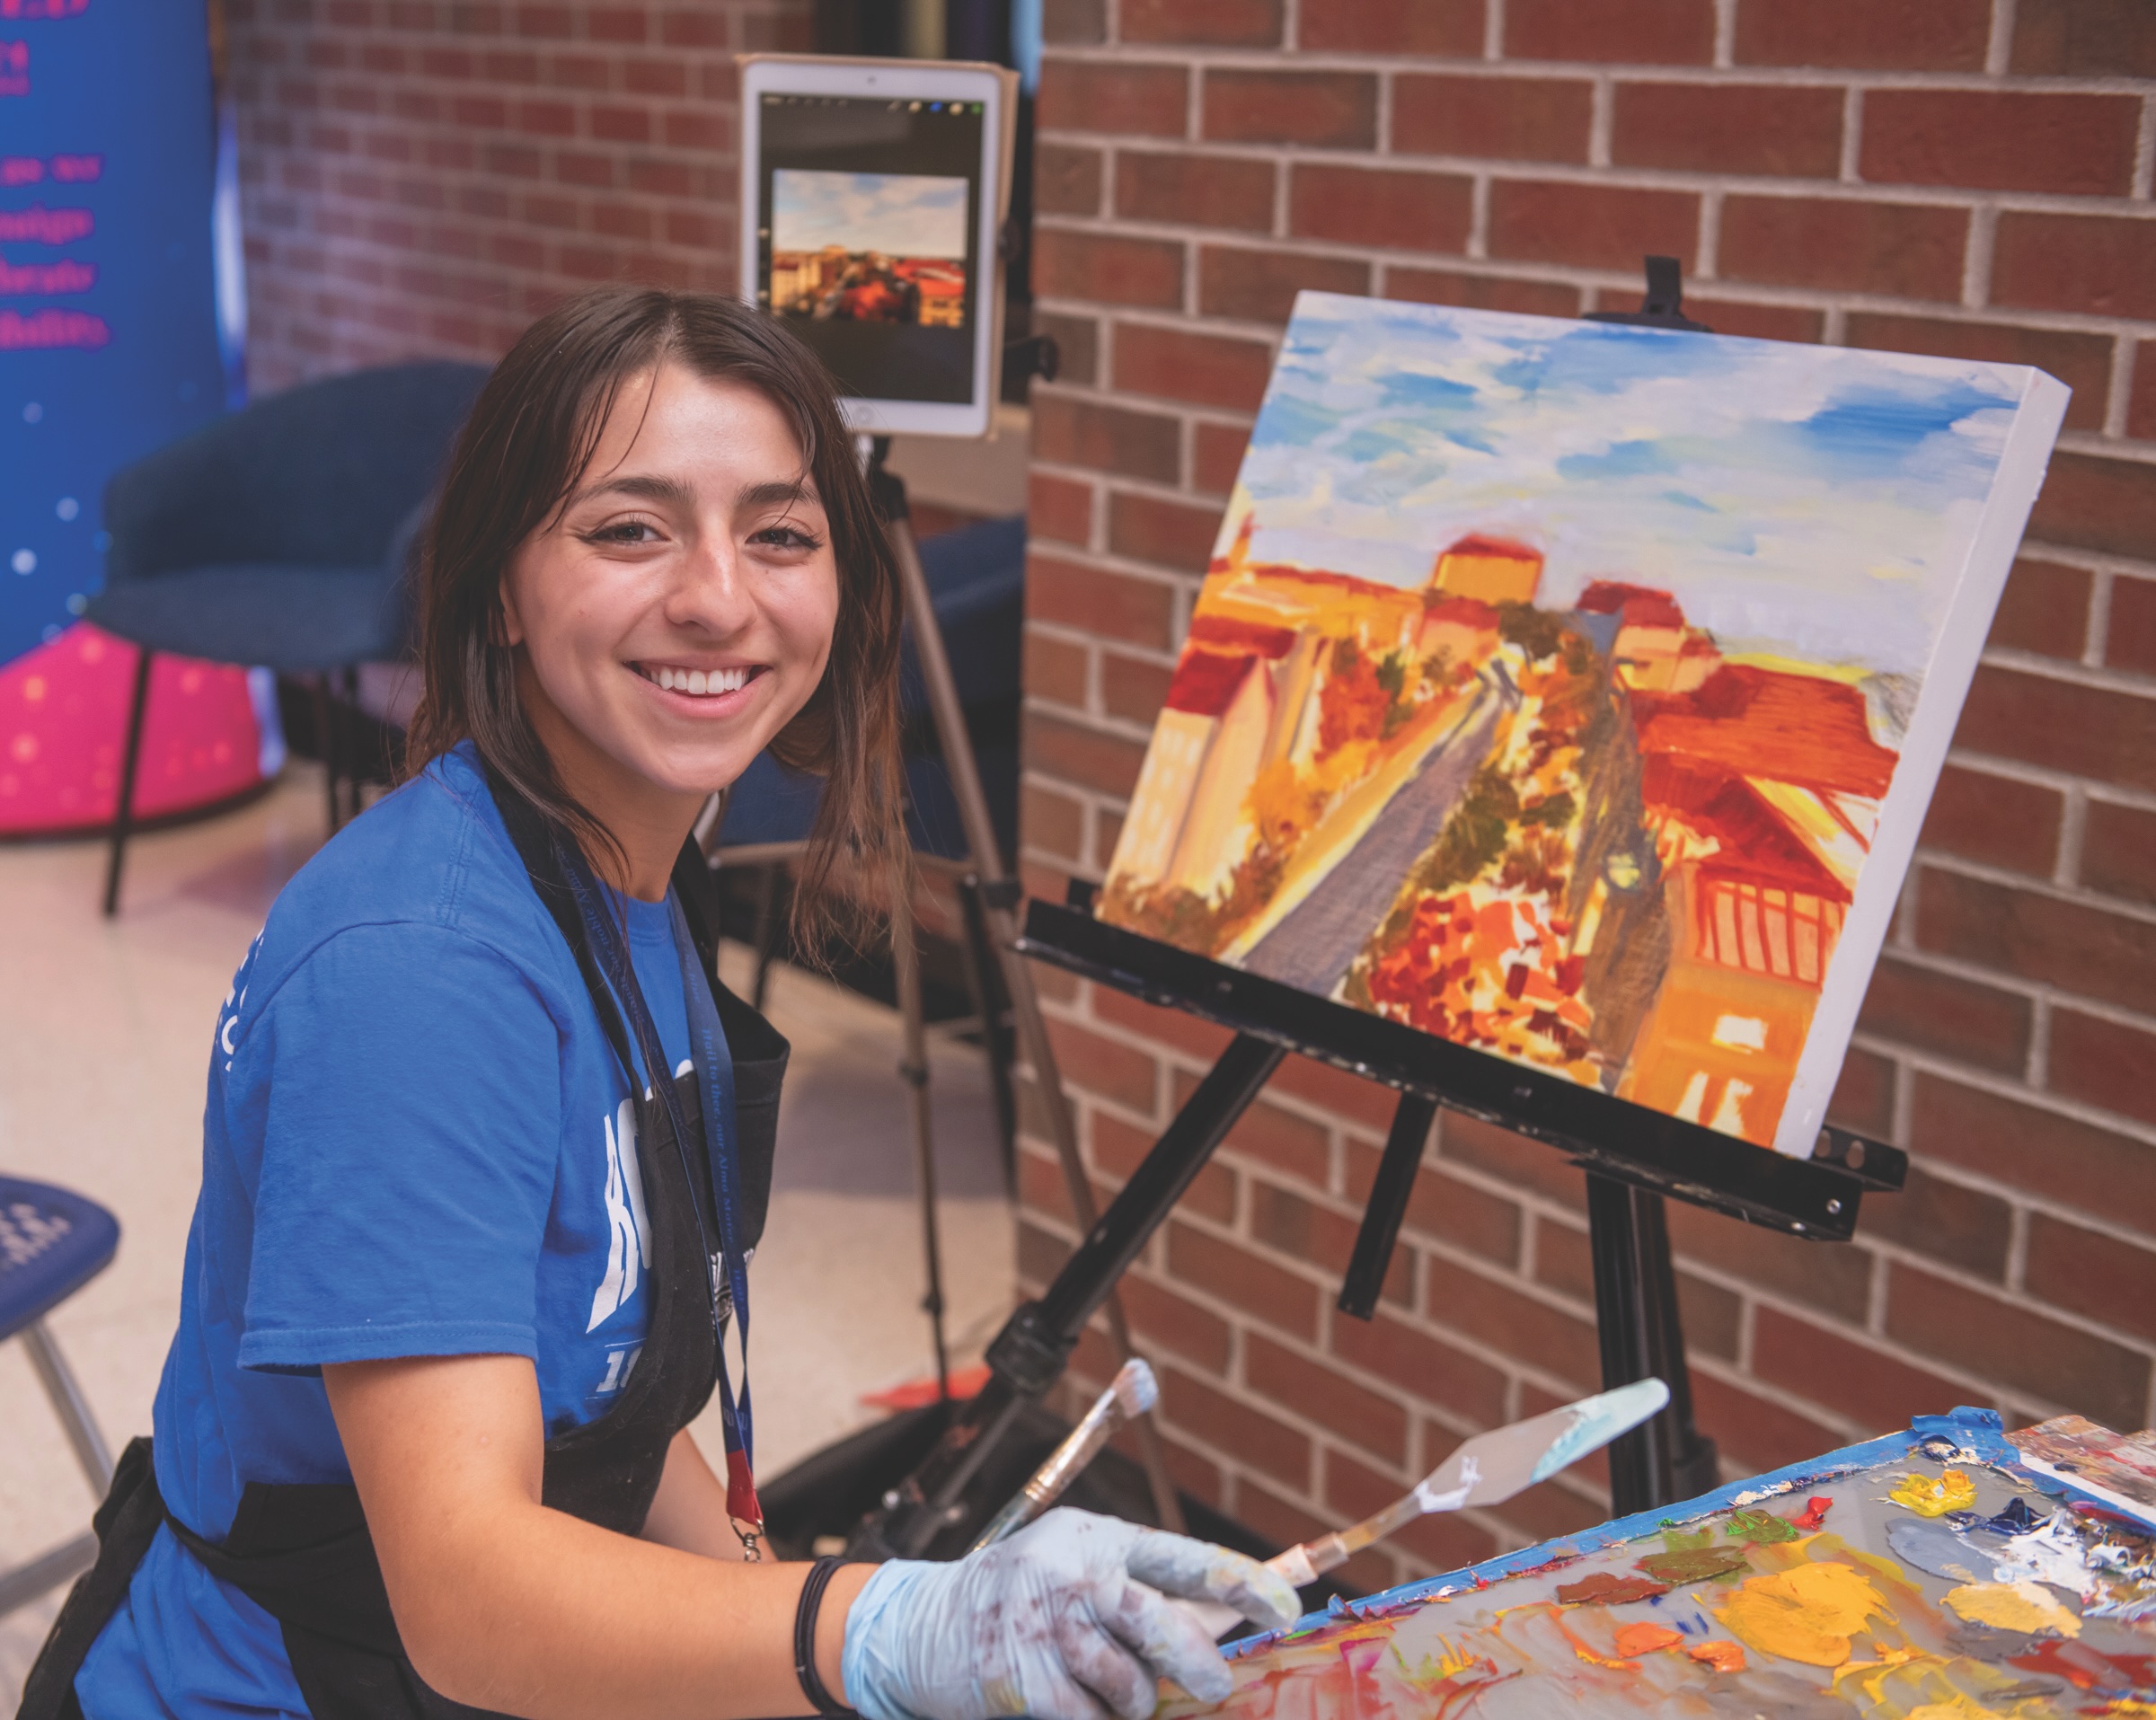 TALENT ON DISPLAY:
KU Painting Club President Octavia Lawson-Solorio paints a familiar campus scene live at the event. Attendees could enter a raffle to take the completed piece home.